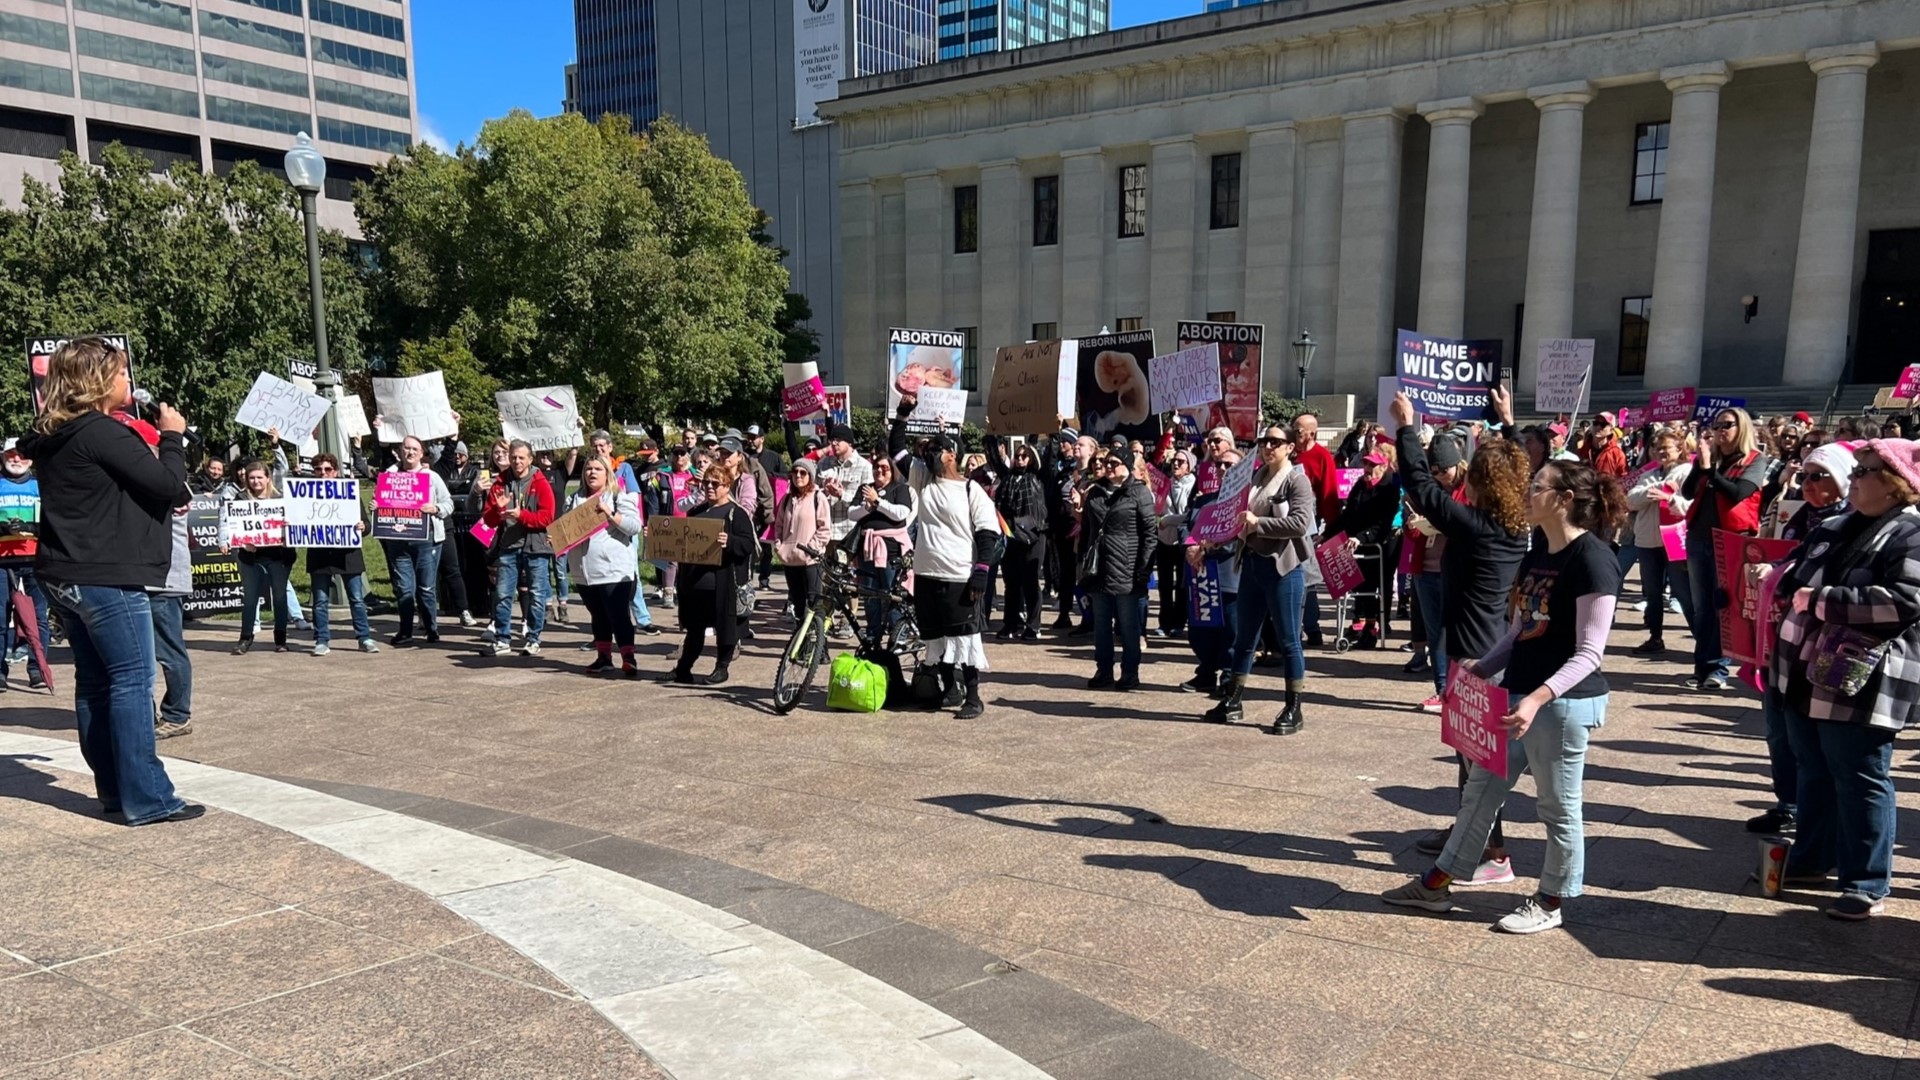 Twenty-four hours since the block of the heartbeat bill, protestors line the Statehouse making their voices heard.